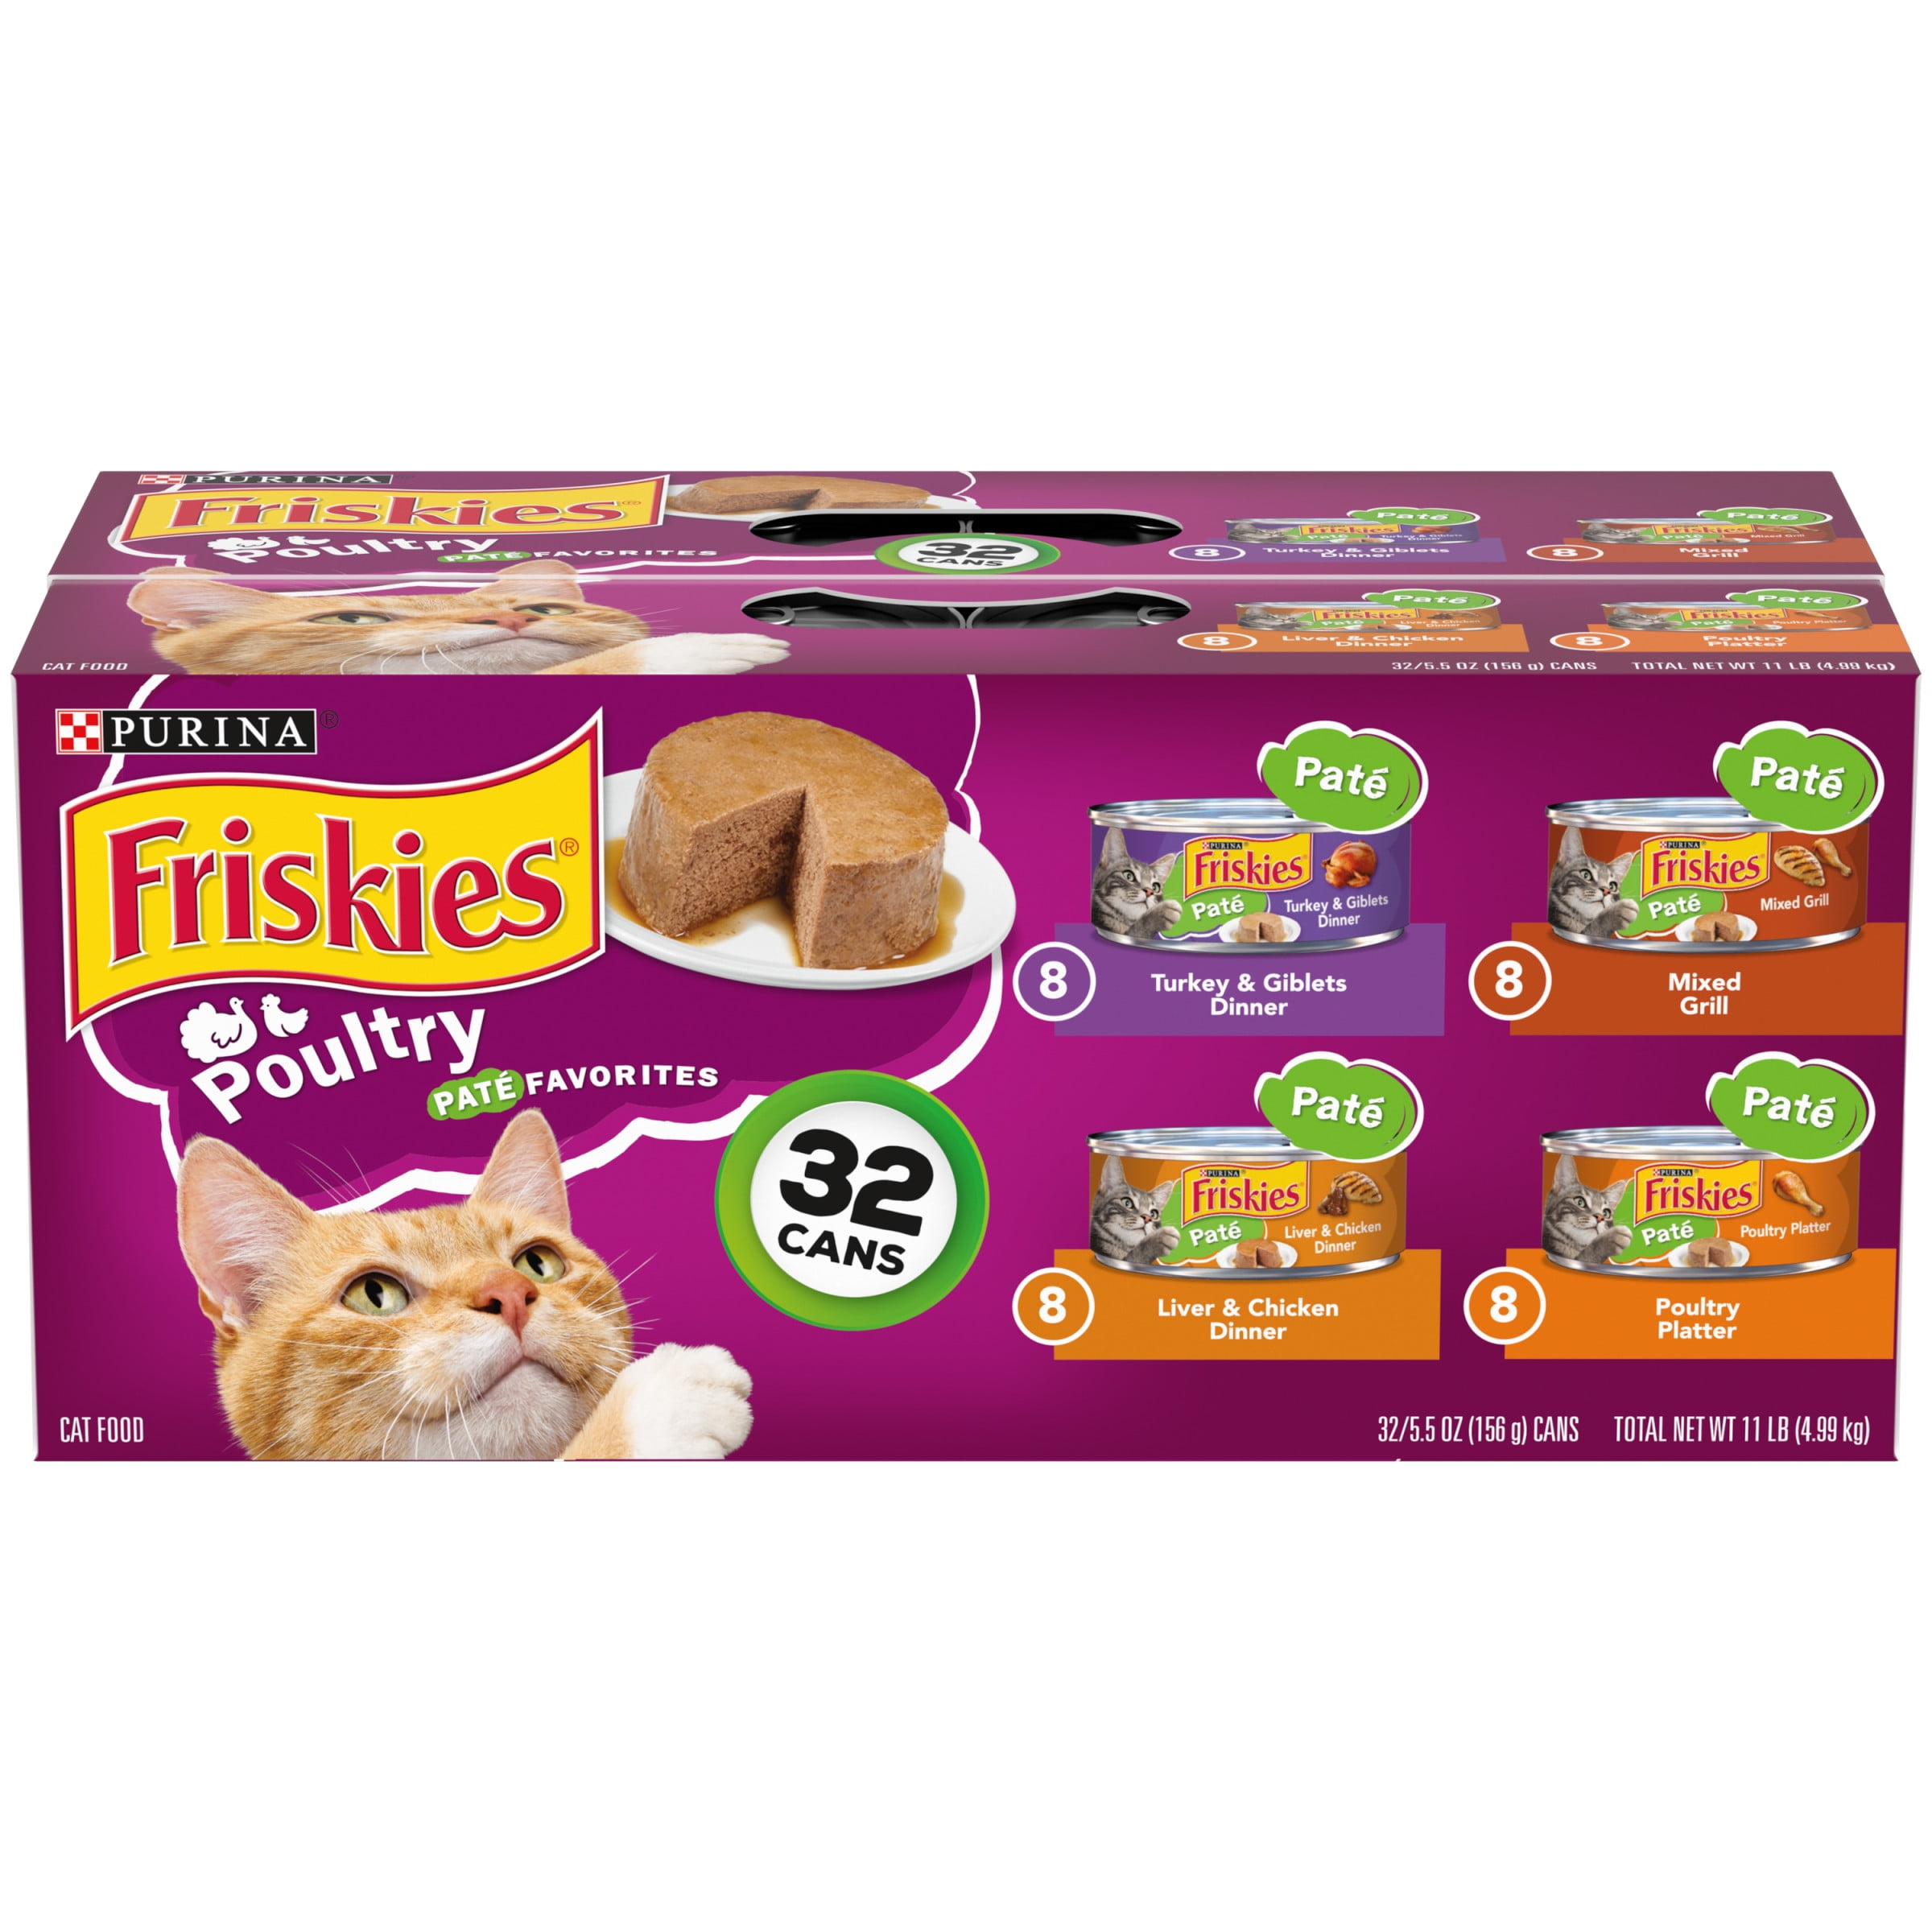 Purina Friskies Poultry Favorites Wet Cat Food Variety Pack, 5.5 oz Cans (32 Pack)